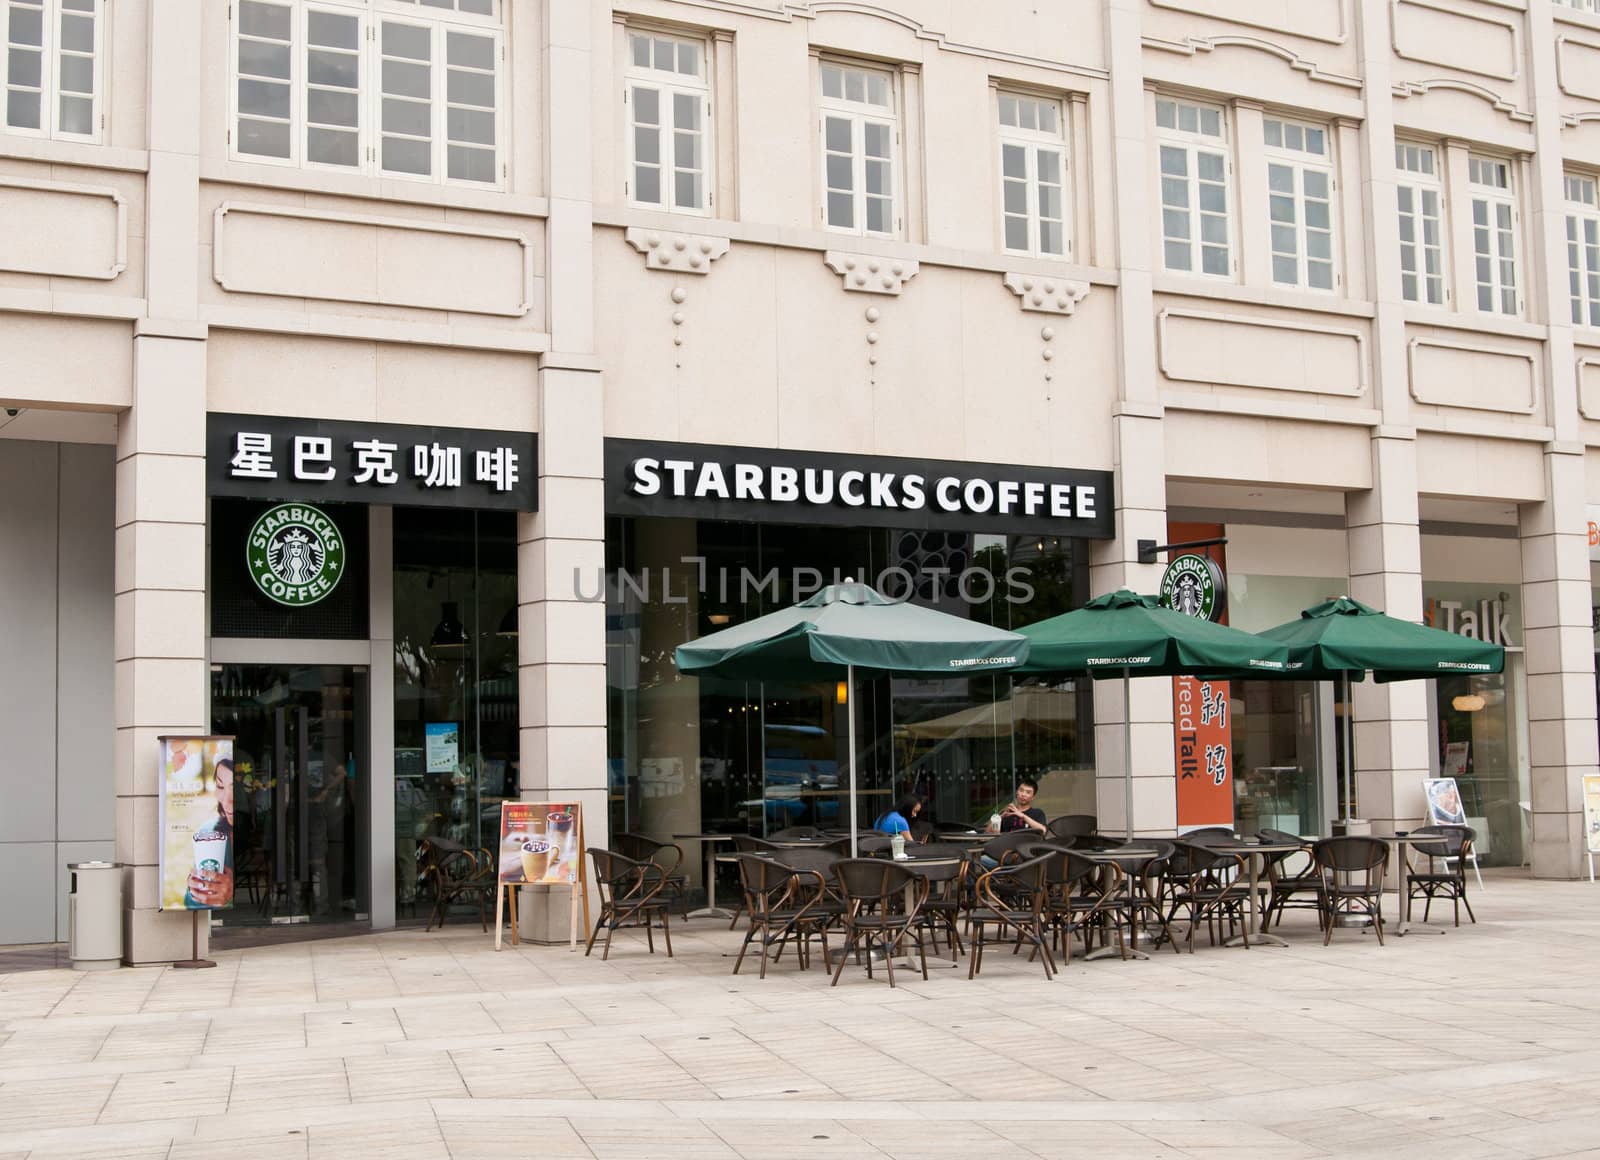 Xiamen, China - September 25:  A new Starbucks coffee shop near the popular tourist destination of Gulangyu opens in the city of Xiamen, China.  Currently it is the largest in all of China.